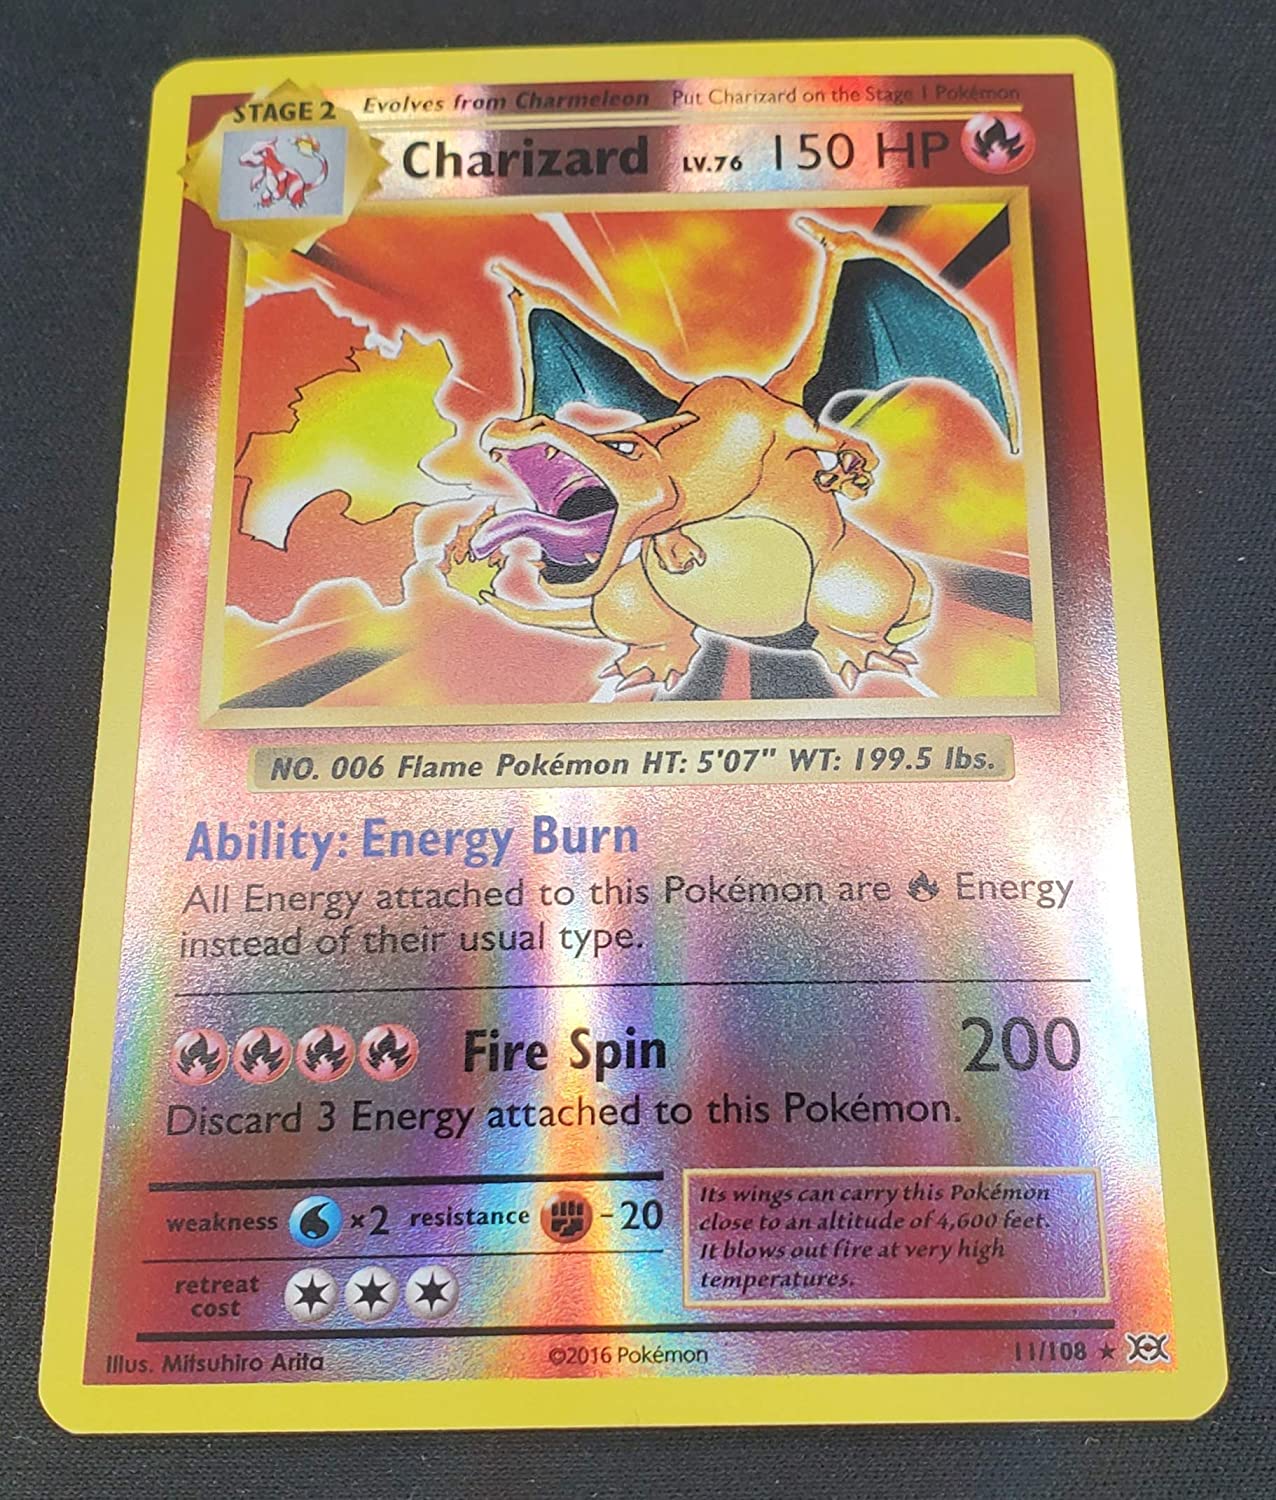 How Much Is A Charmander Pokemon Card Worth